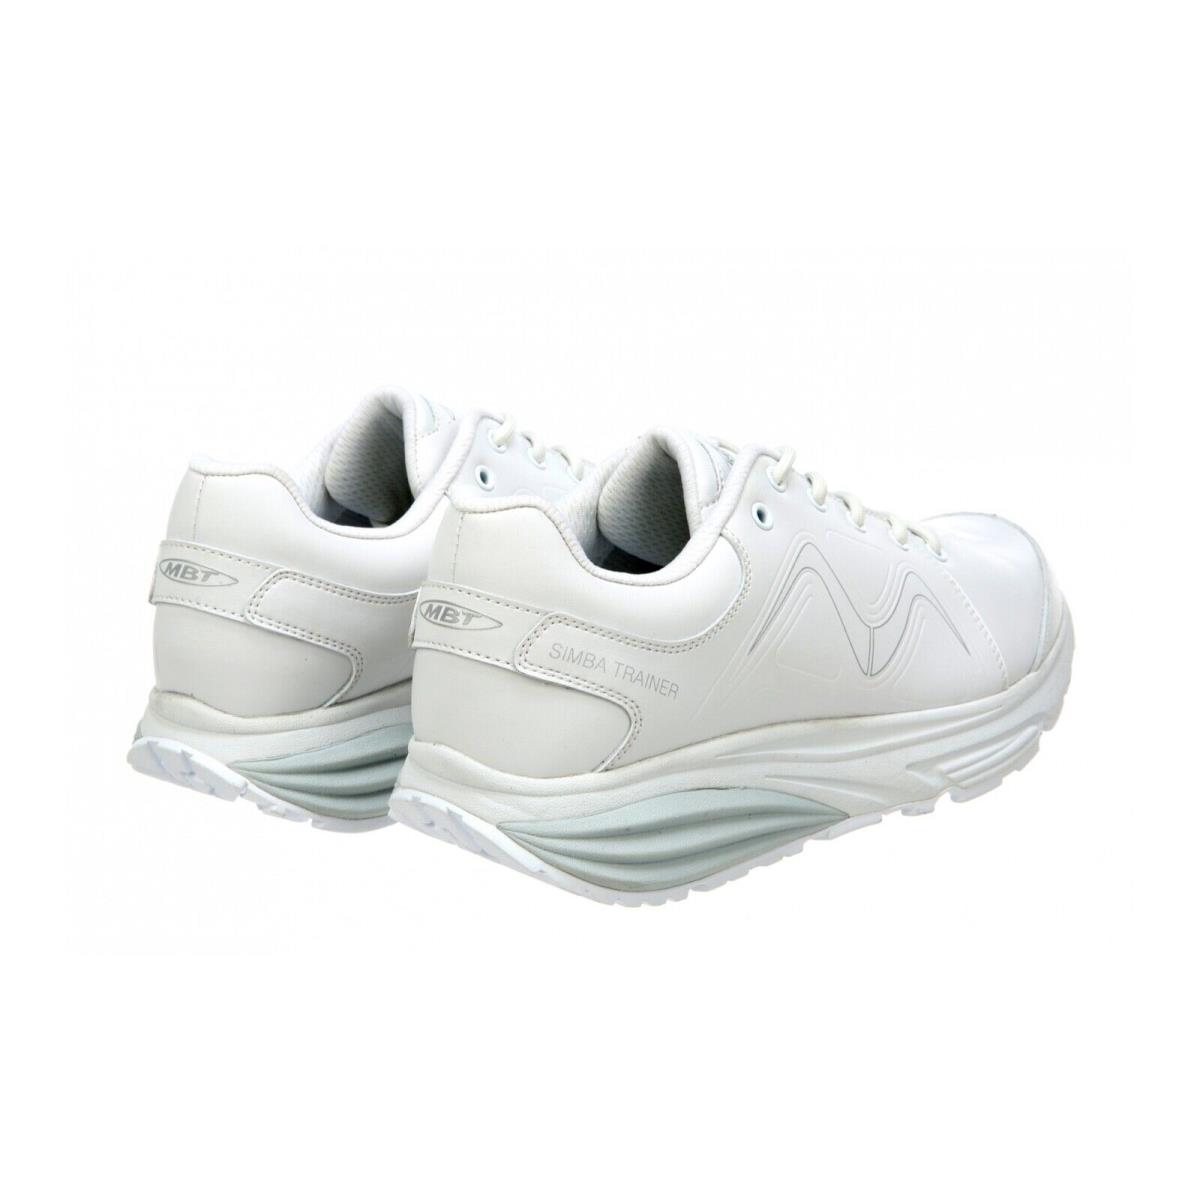 MBT shoes SIMBA TRAINER - White 0